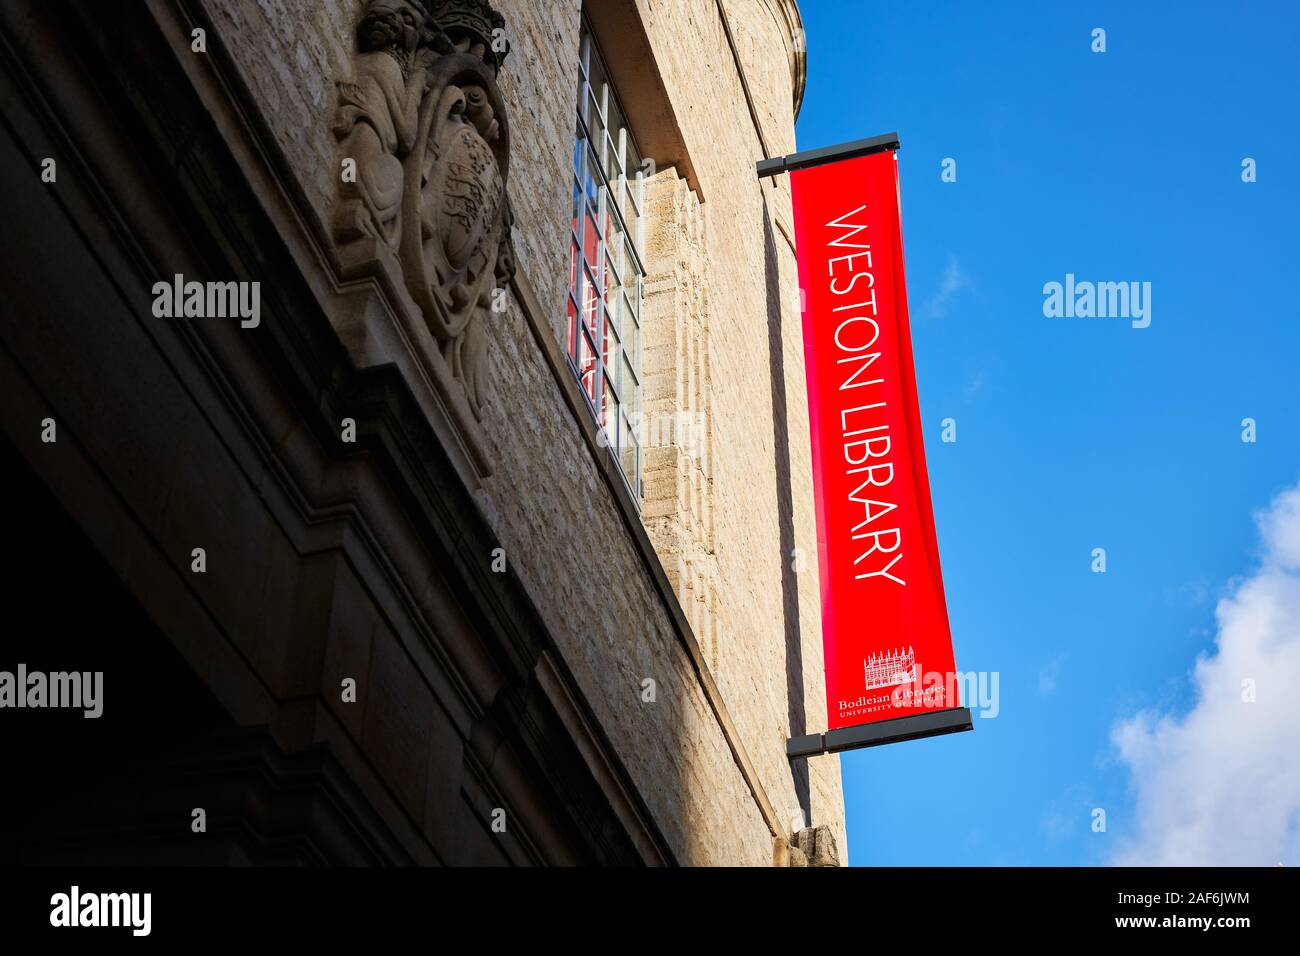 Red sign on the outside wall of the Weston library, university of Oxford, England. Stock Photo